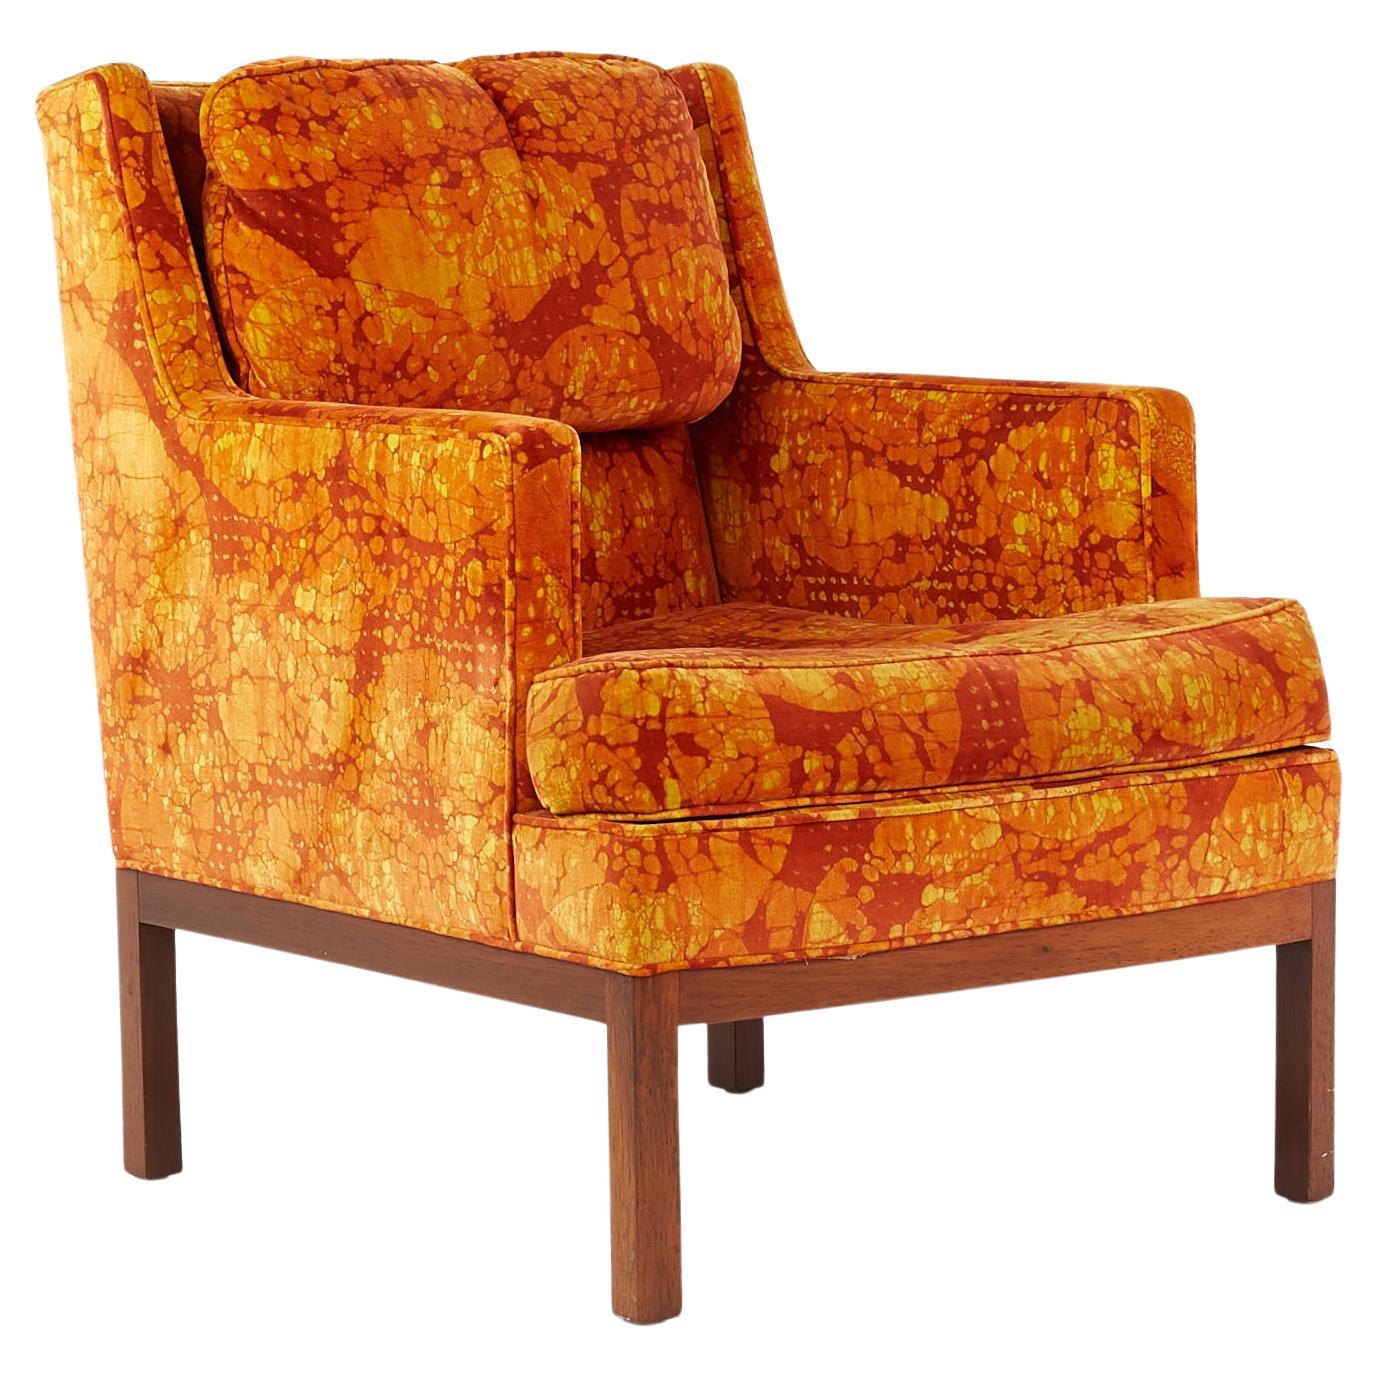 Edward Wormley for Dunbar Mid Century Lounge Chair with Jack Lenor Larsen Fabric For Sale